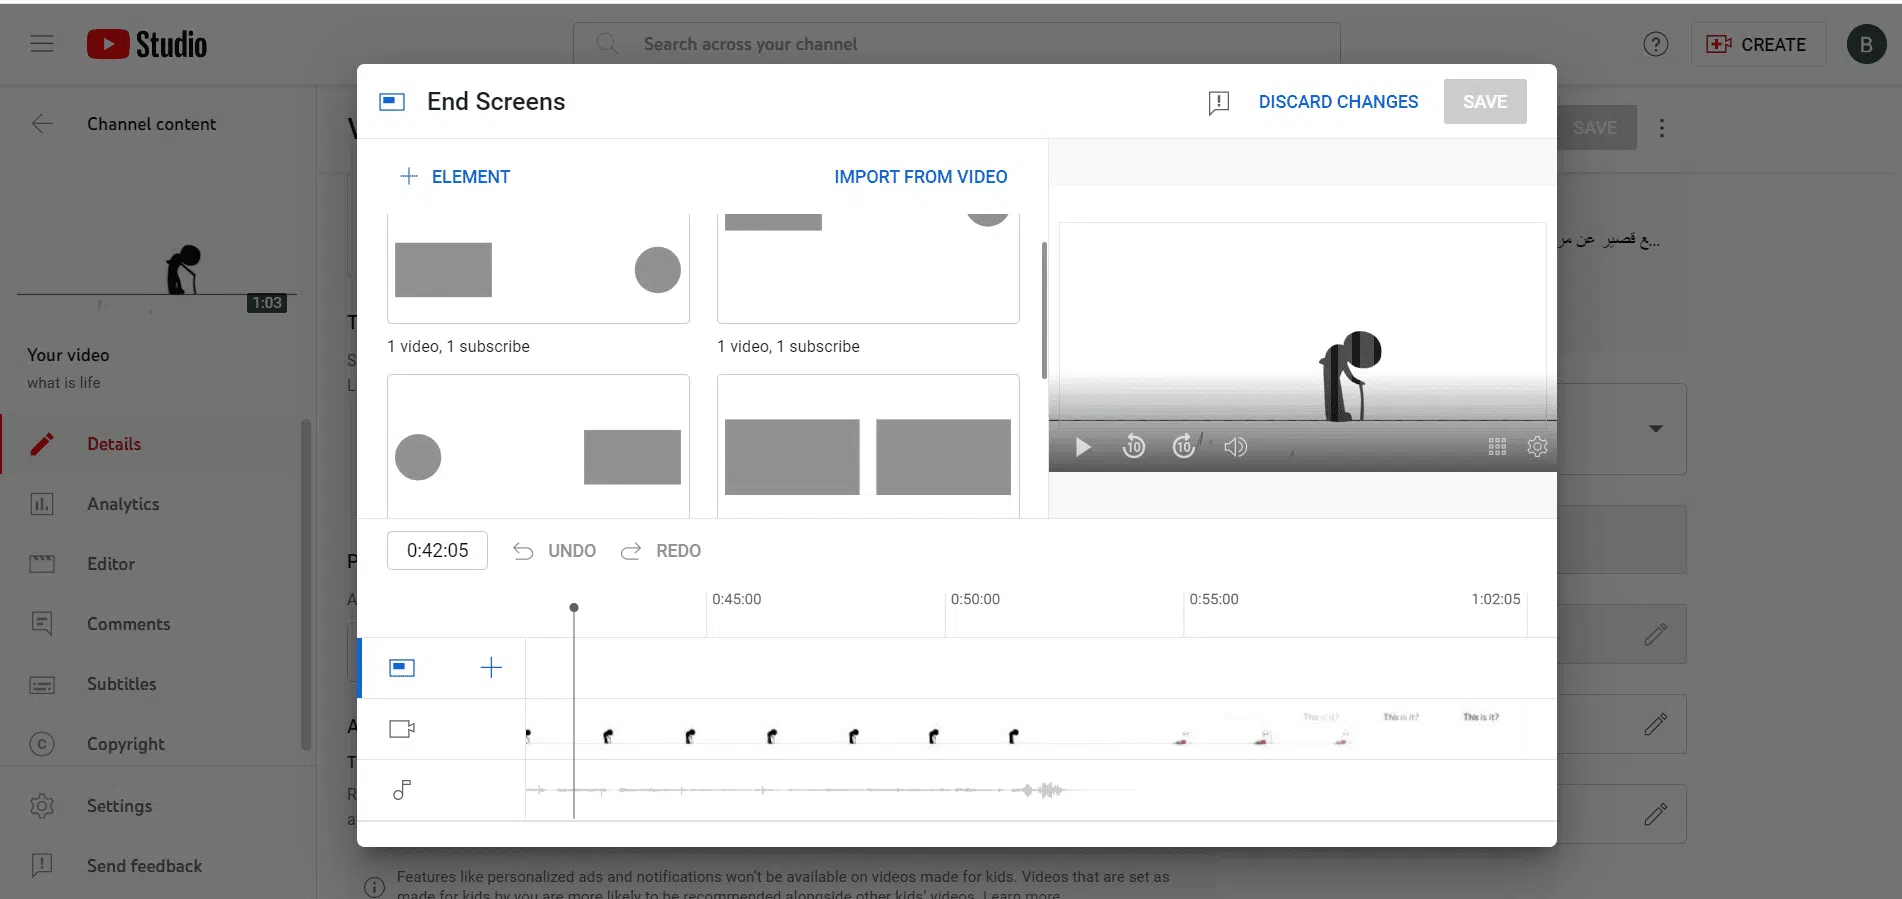 Screenshot showing how End Screens are edited for YouTube videos.